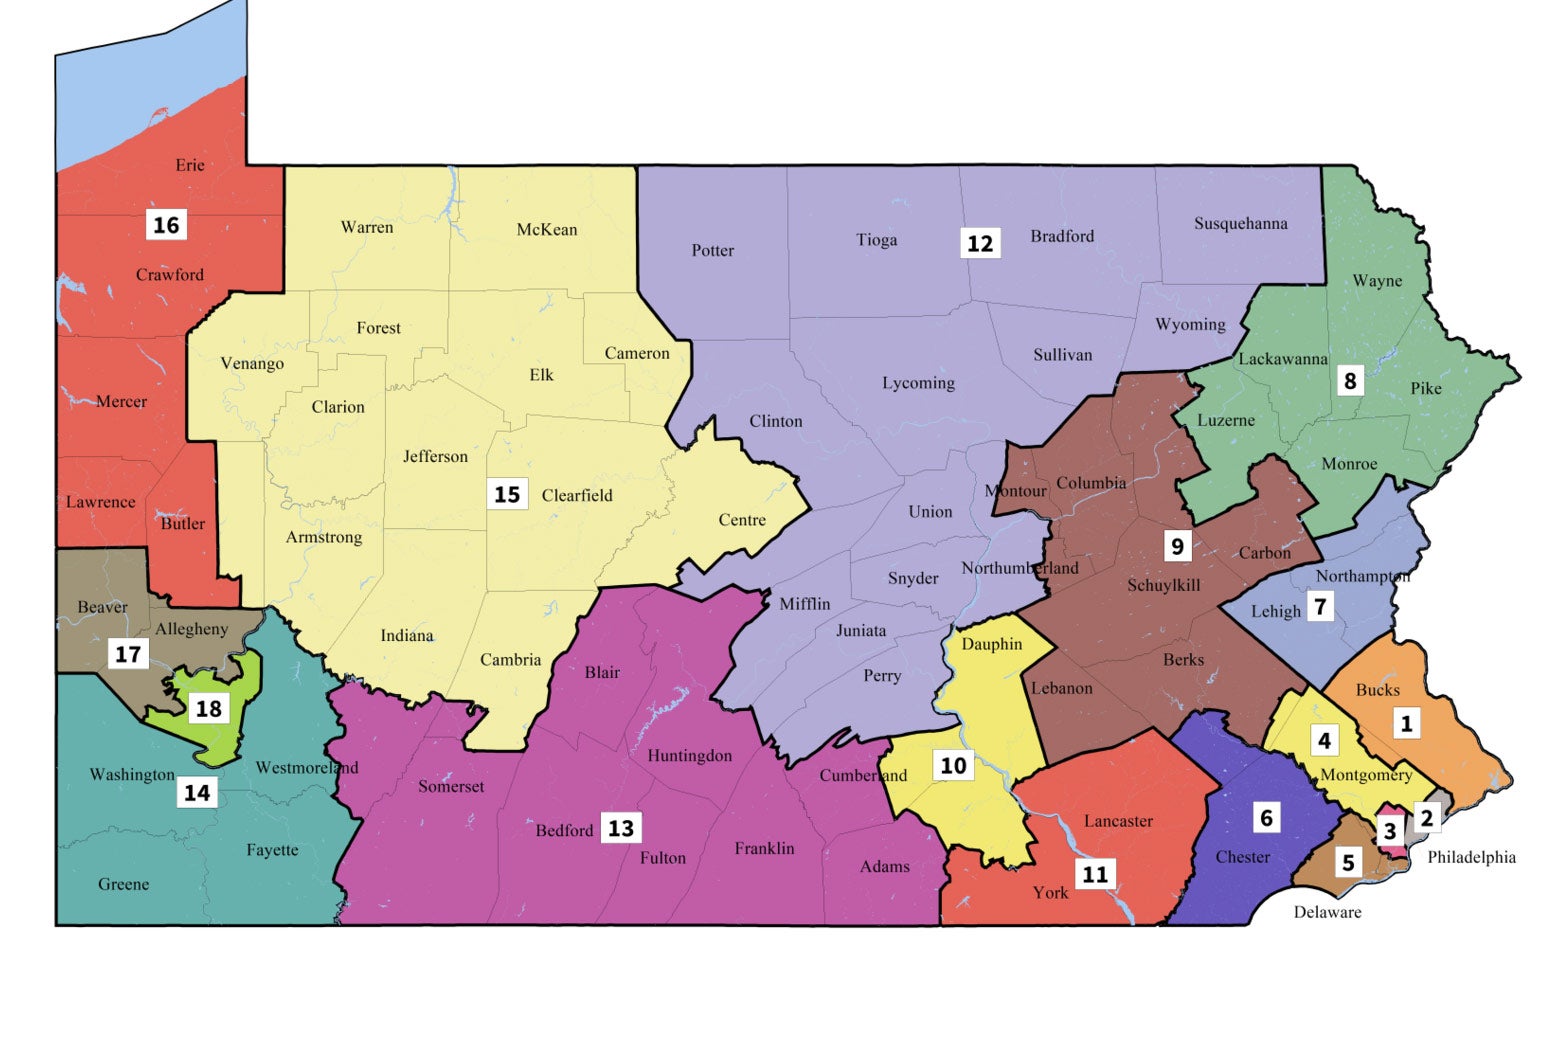 An image of new Pennsylvania congressional maps, with its 18 districts displayed in different colors.